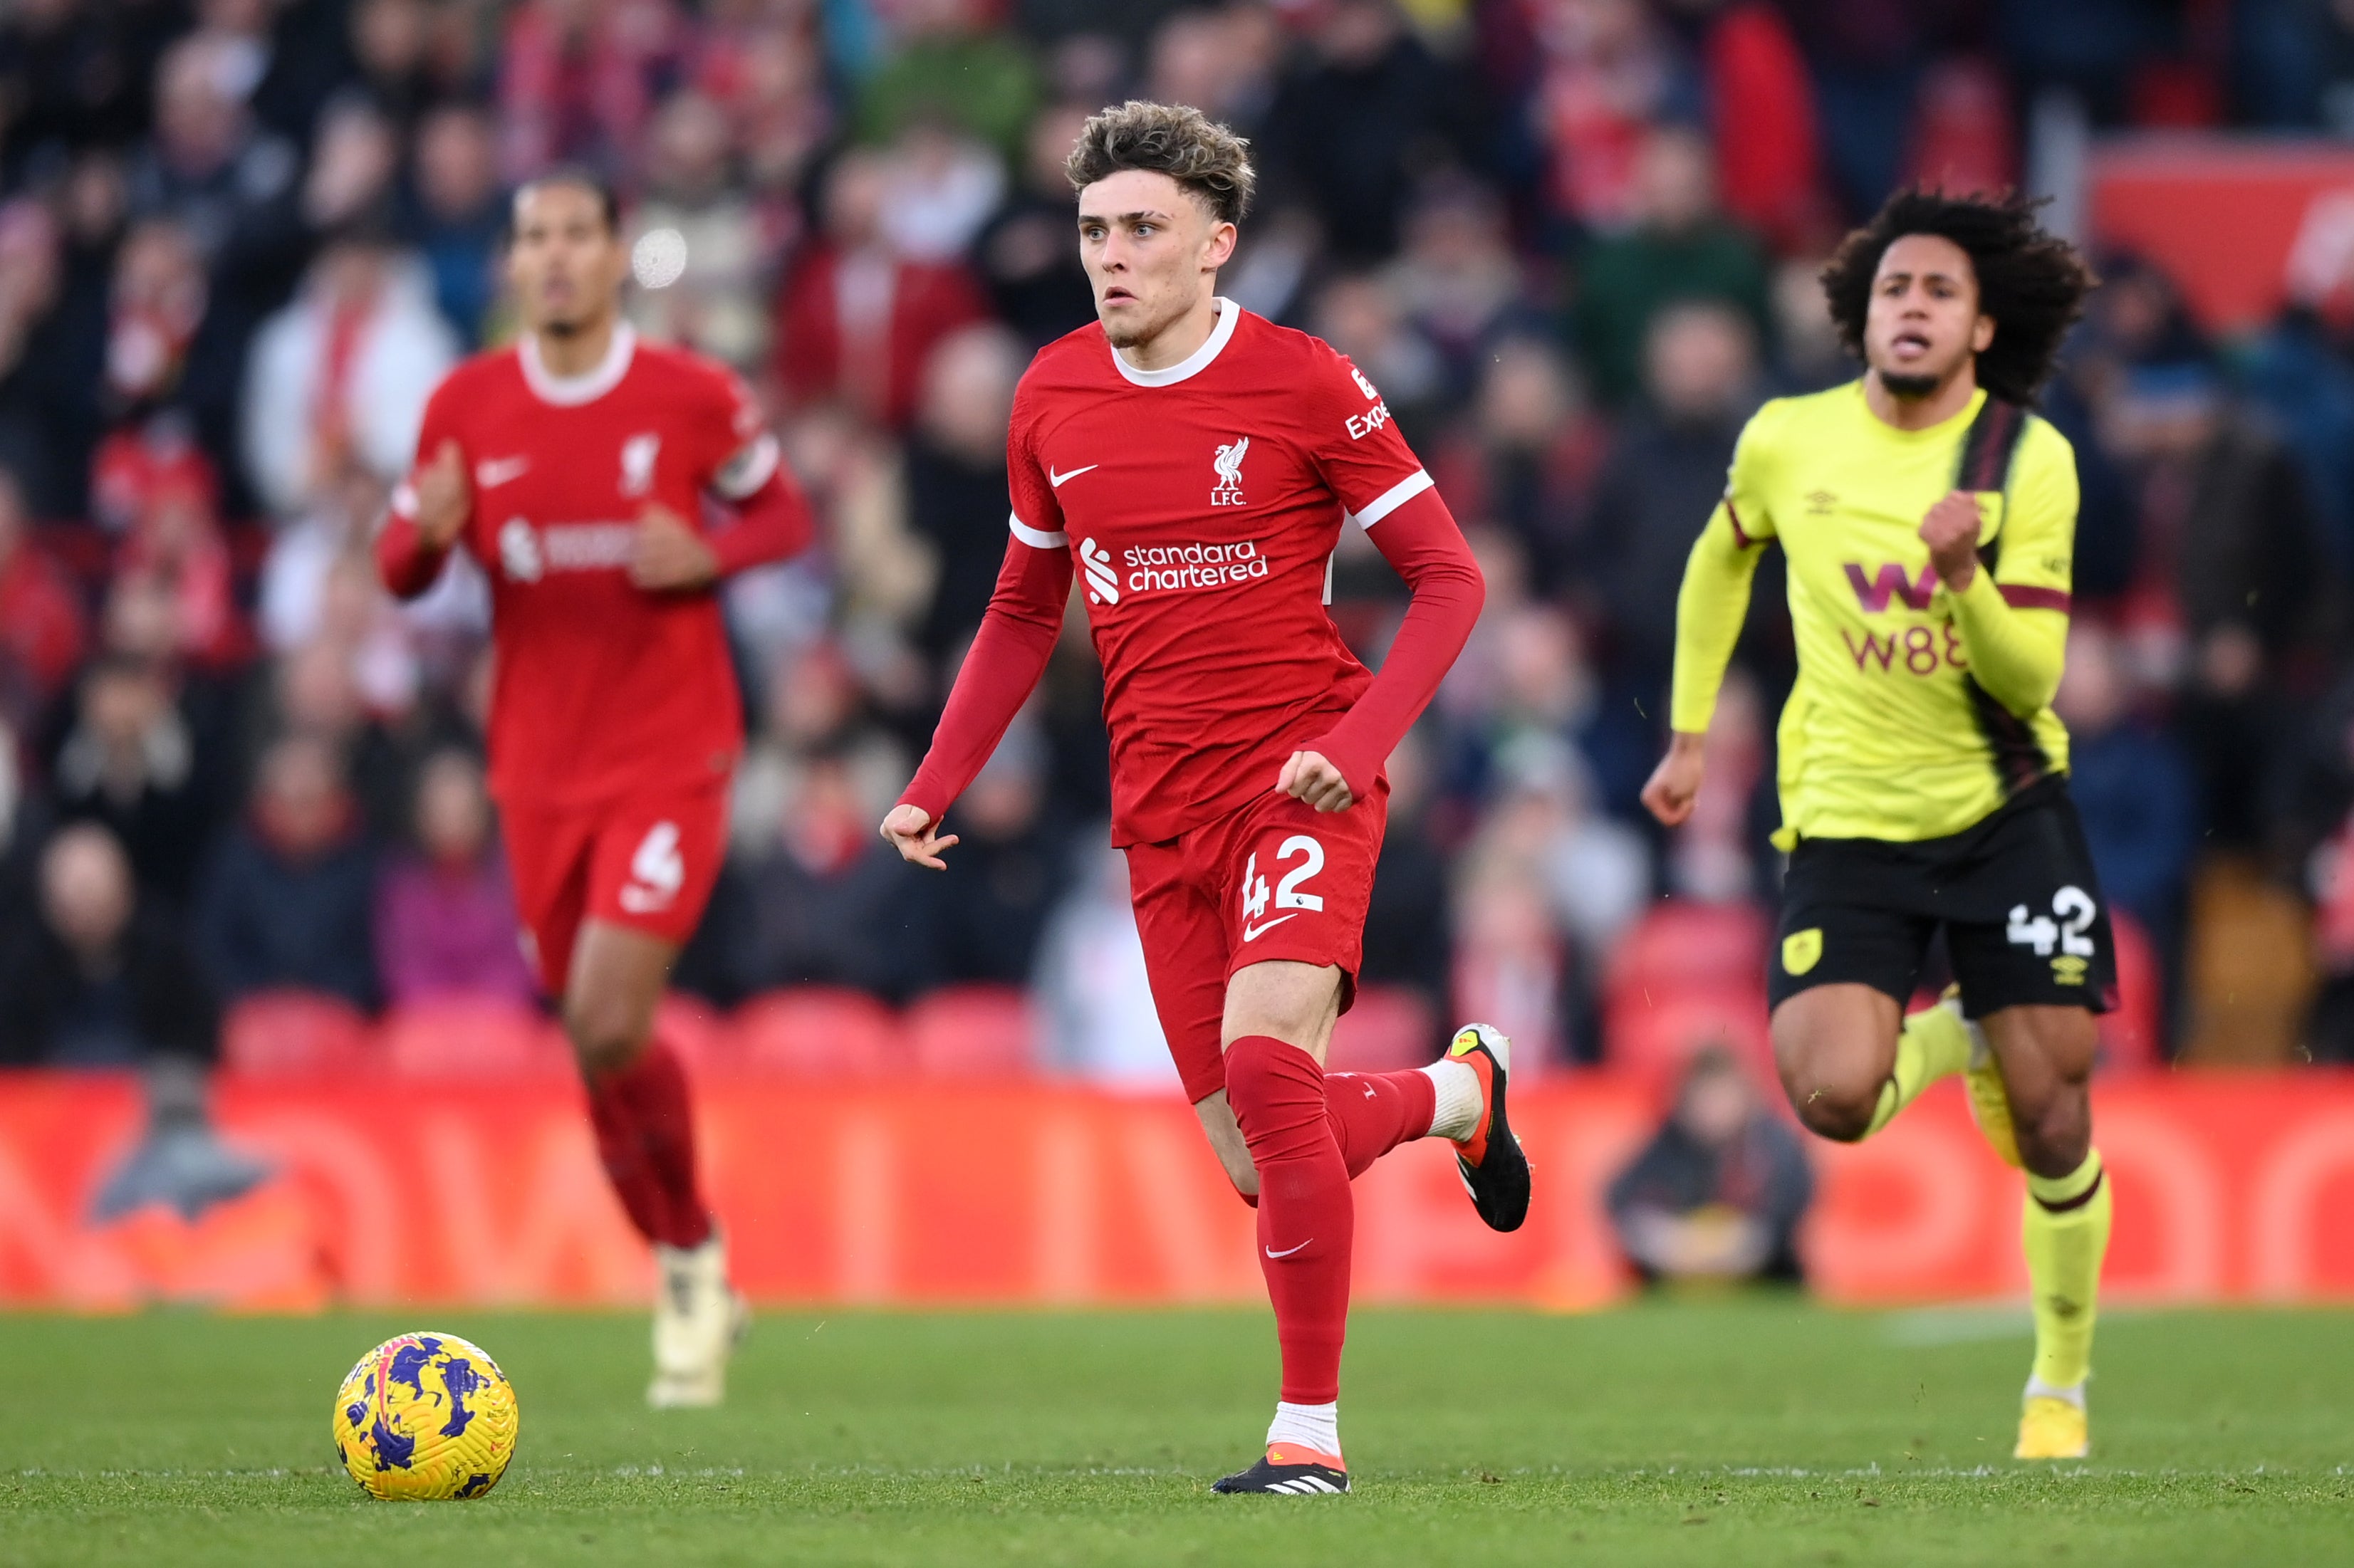 meet the liverpool kids who inspired carabao cup triumph